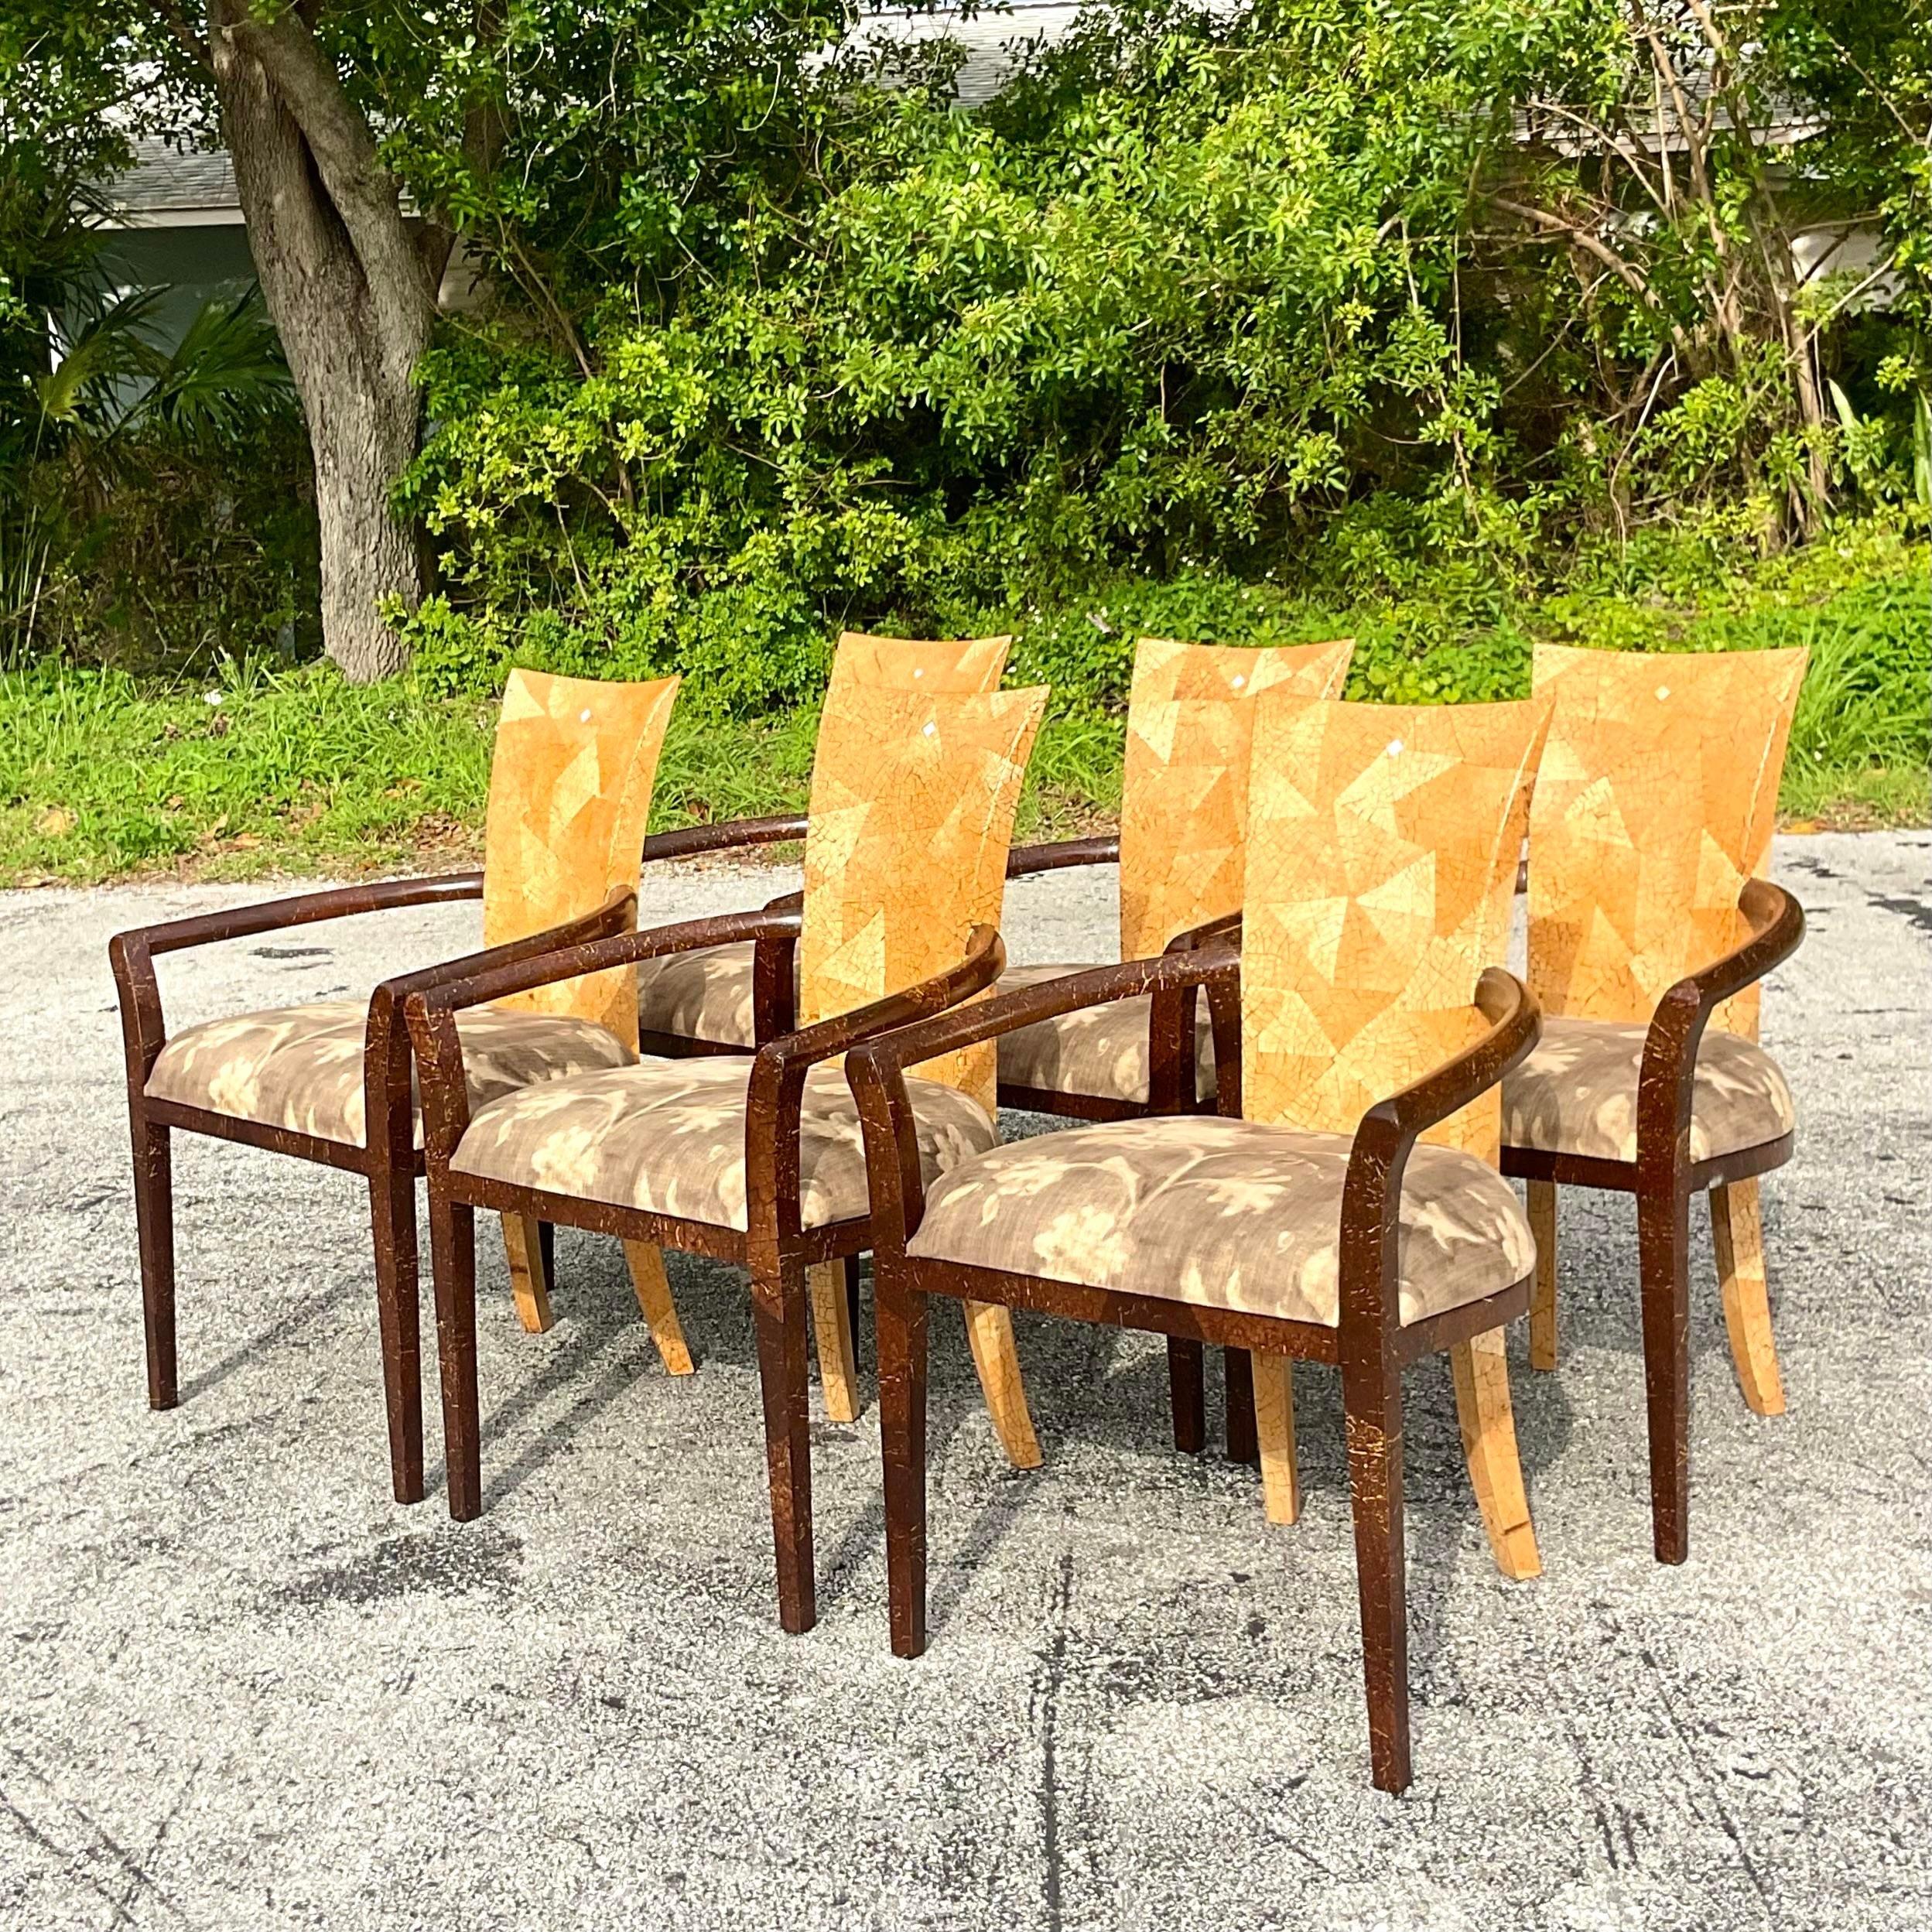 Philippine Vintage Boho Tessellated Coconut Shell Dining Chairs - Set of 6 For Sale